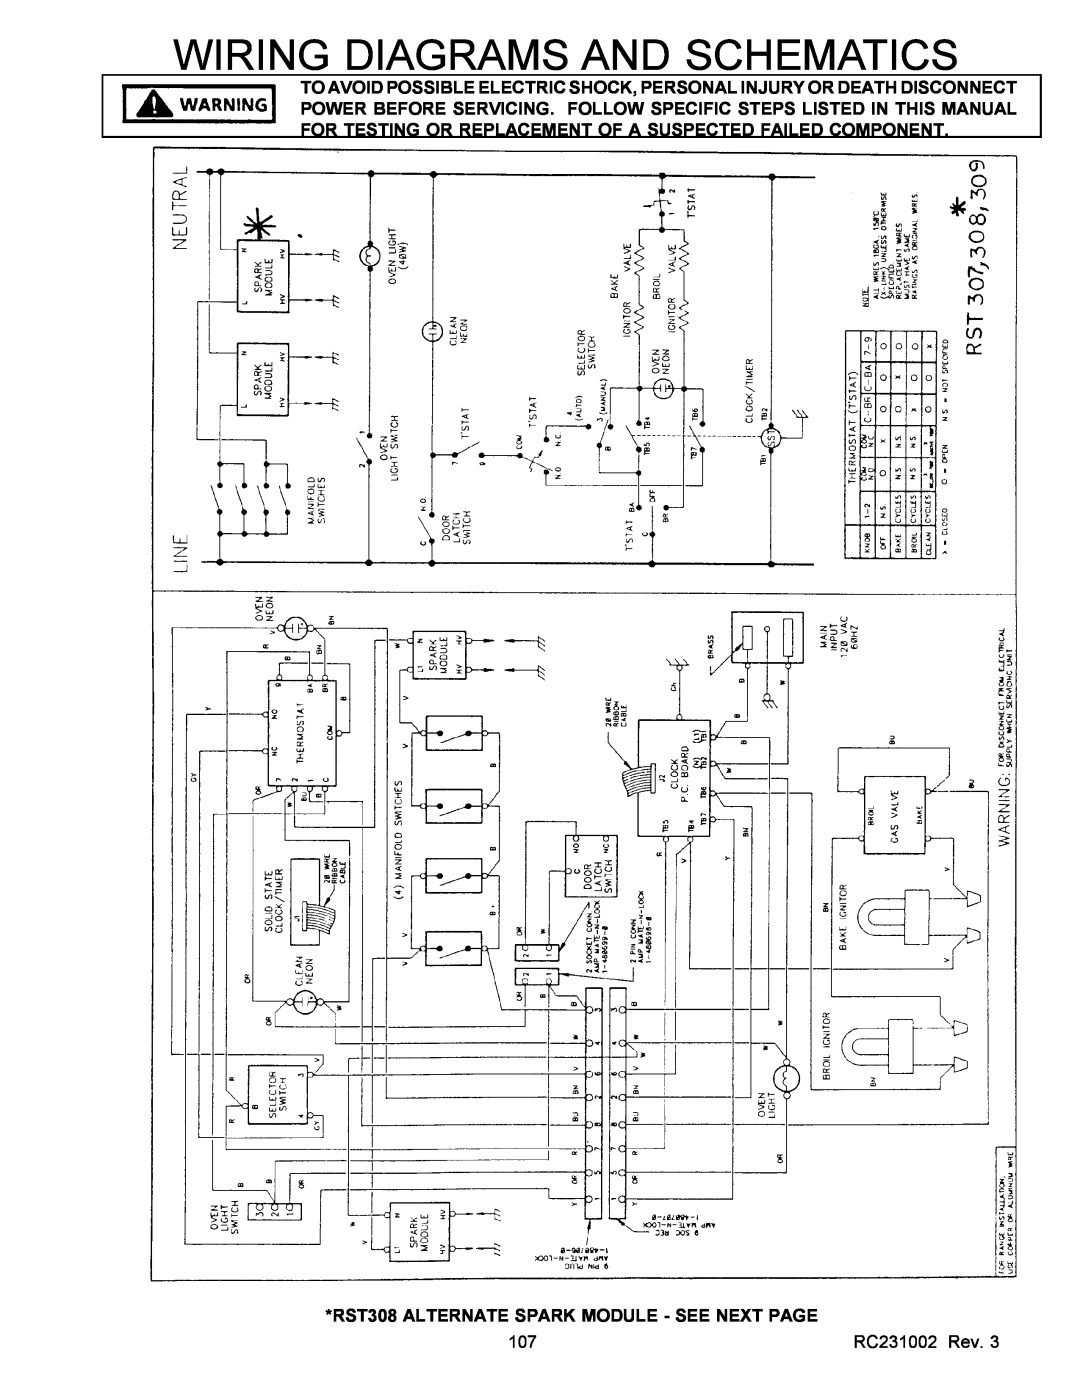 Amana RSS service manual Wiring Diagrams And Schematics, RST308 ALTERNATE SPARK MODULE - SEE NEXT PAGE 